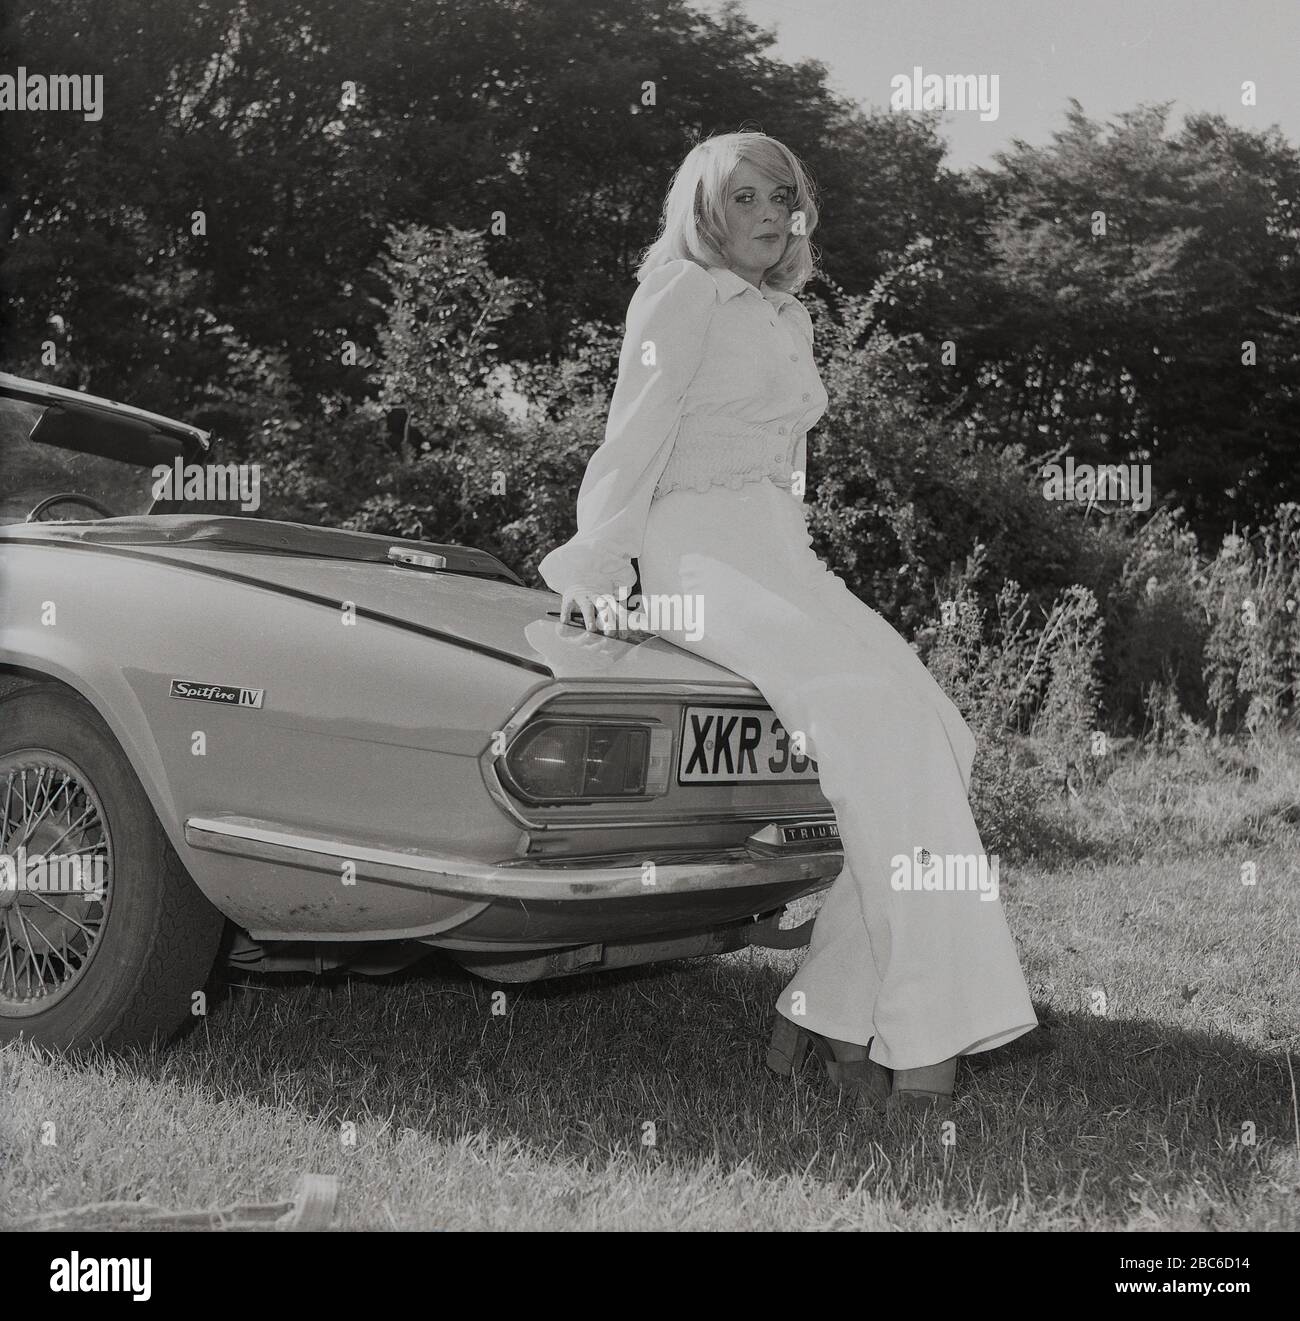 1970s, historical, Outside in a sun-lit field, an attractive blonde woman in a white top and bell-bottomed trousers, standing beside her open-top sports car, a Triumph Spitfire IV, with wire wheels, England, UK. First introduced in 1962, based on a design by Giovanni Michelotti, the Spitfire was a small British two-seat sports car and manufactured up to 1980. The mark IV model shown here was made at Standard-Triumph works (owned by Leyland Motors) in Canley, Coventry between 1970 and 1974 and among other new features from previous models, was a newly designed rear end. Stock Photo